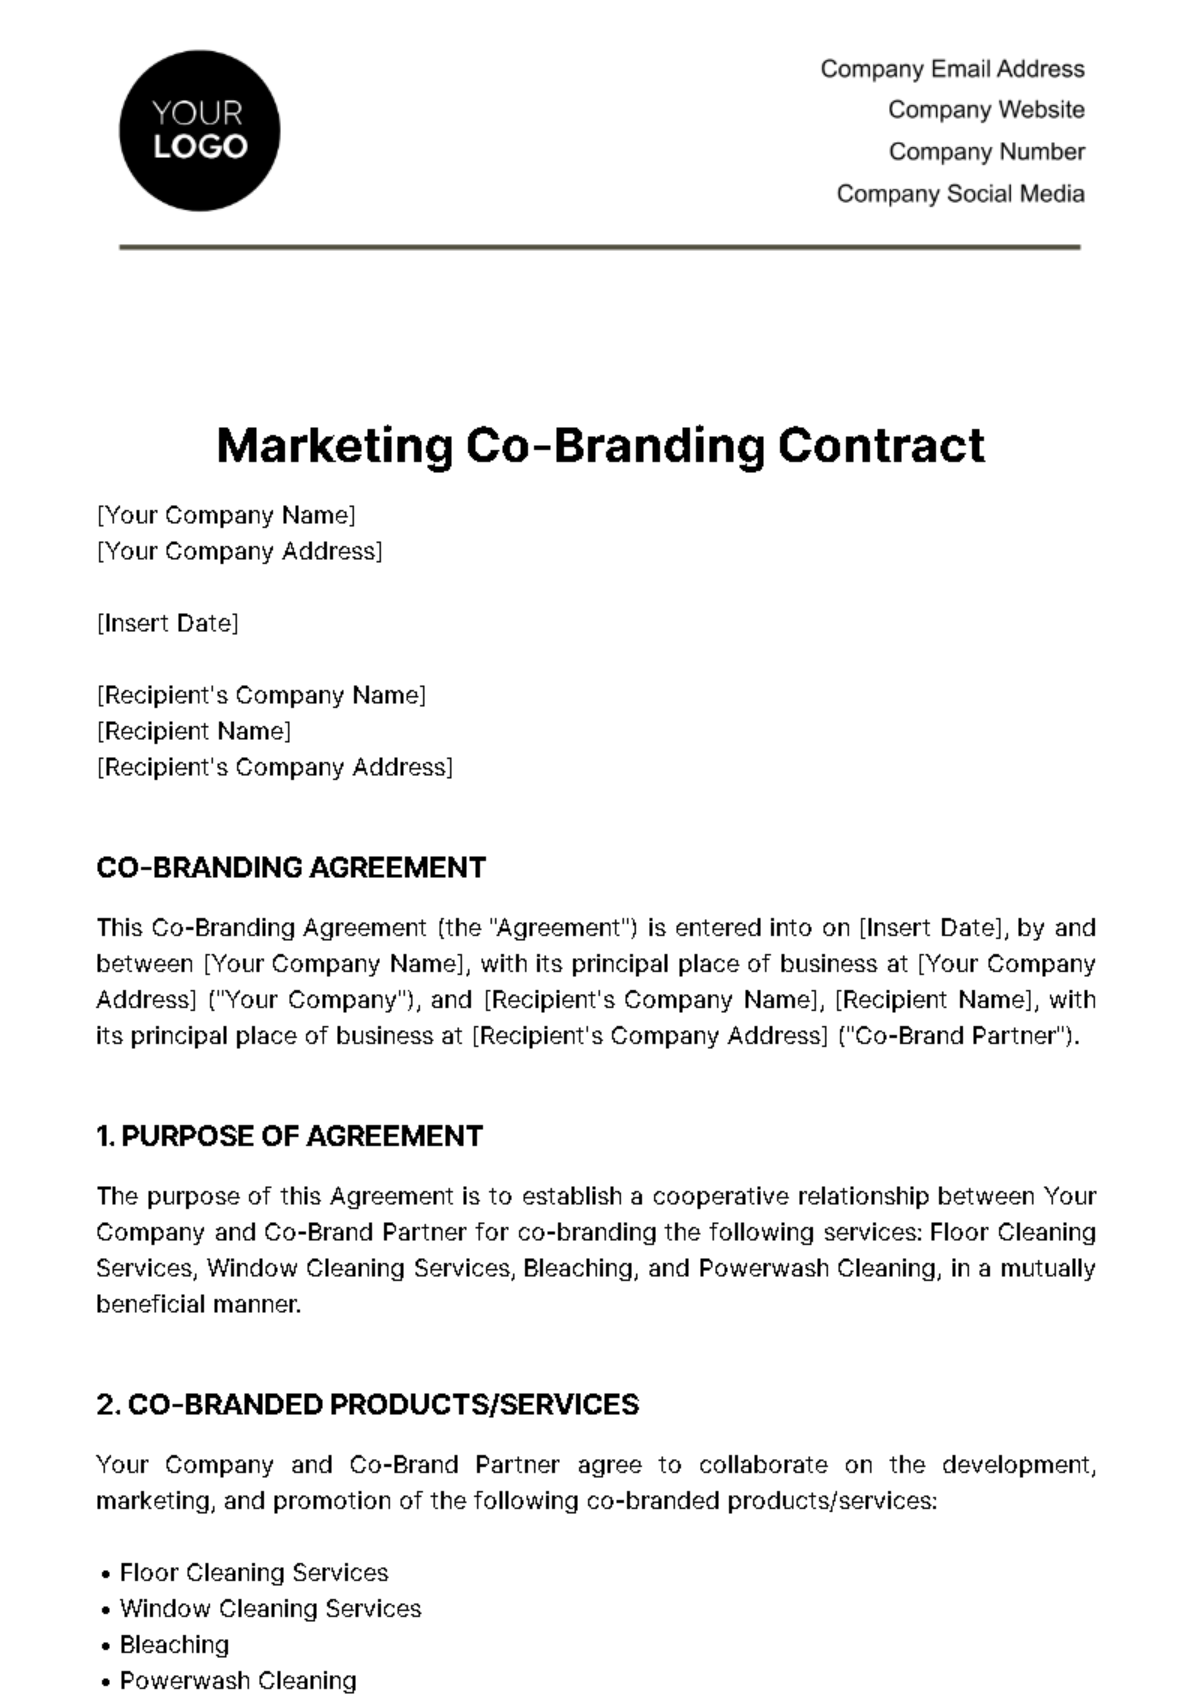 Free Marketing Co-branding Contract Template